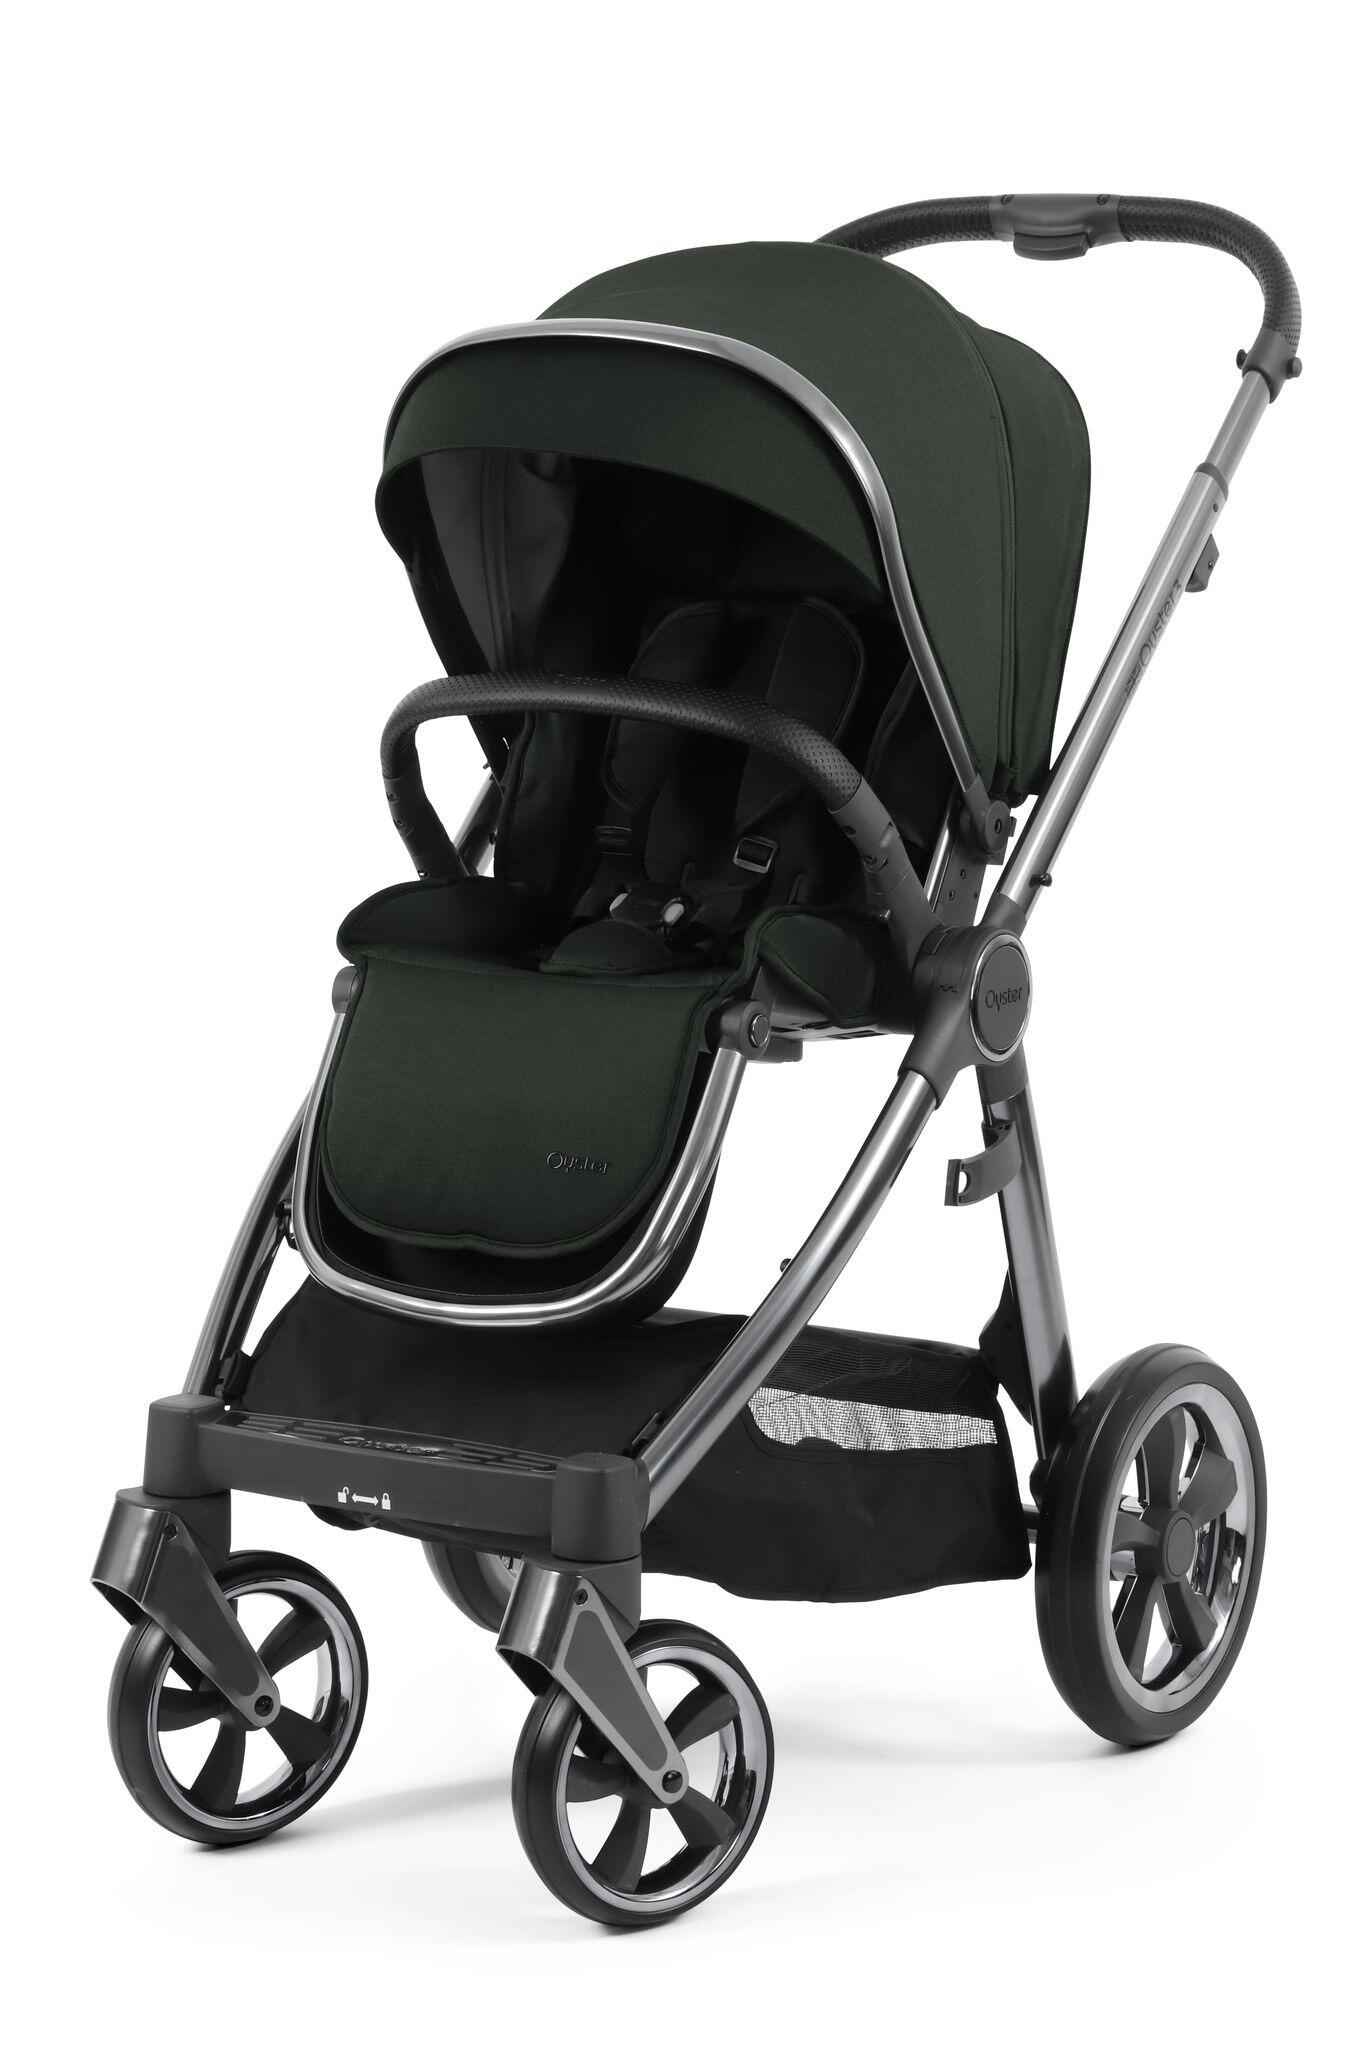 BabyStyle Oyster 3 Black Olive pushchair-5